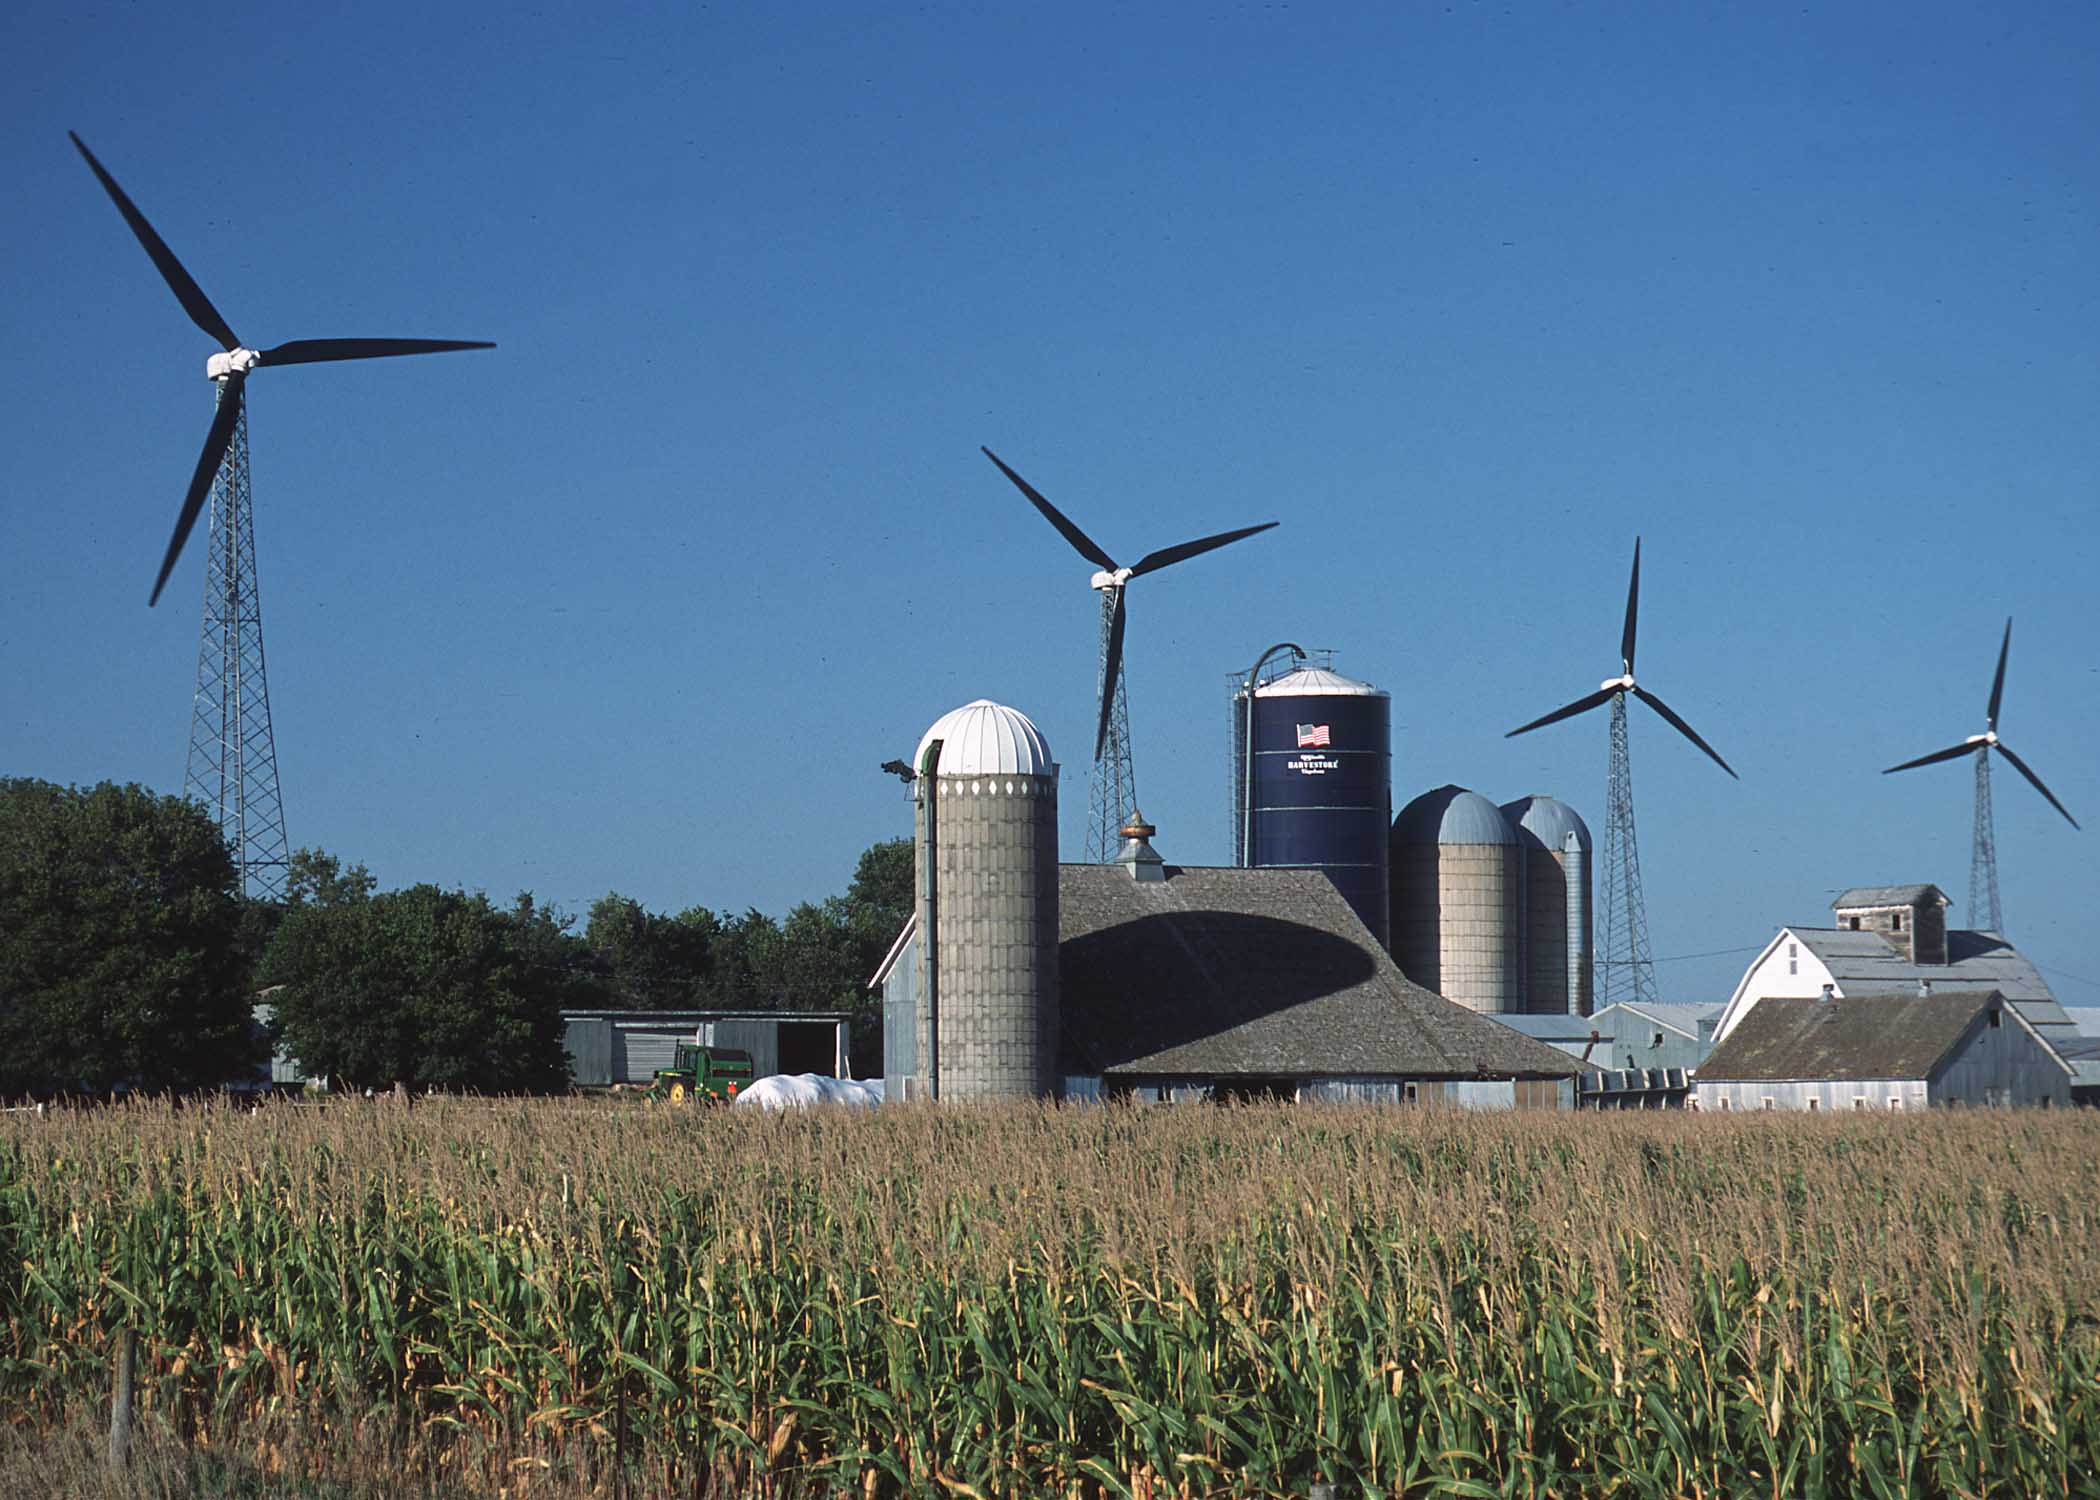 Picture of silo, green fields, with several modern wind generators in background, blue sky.